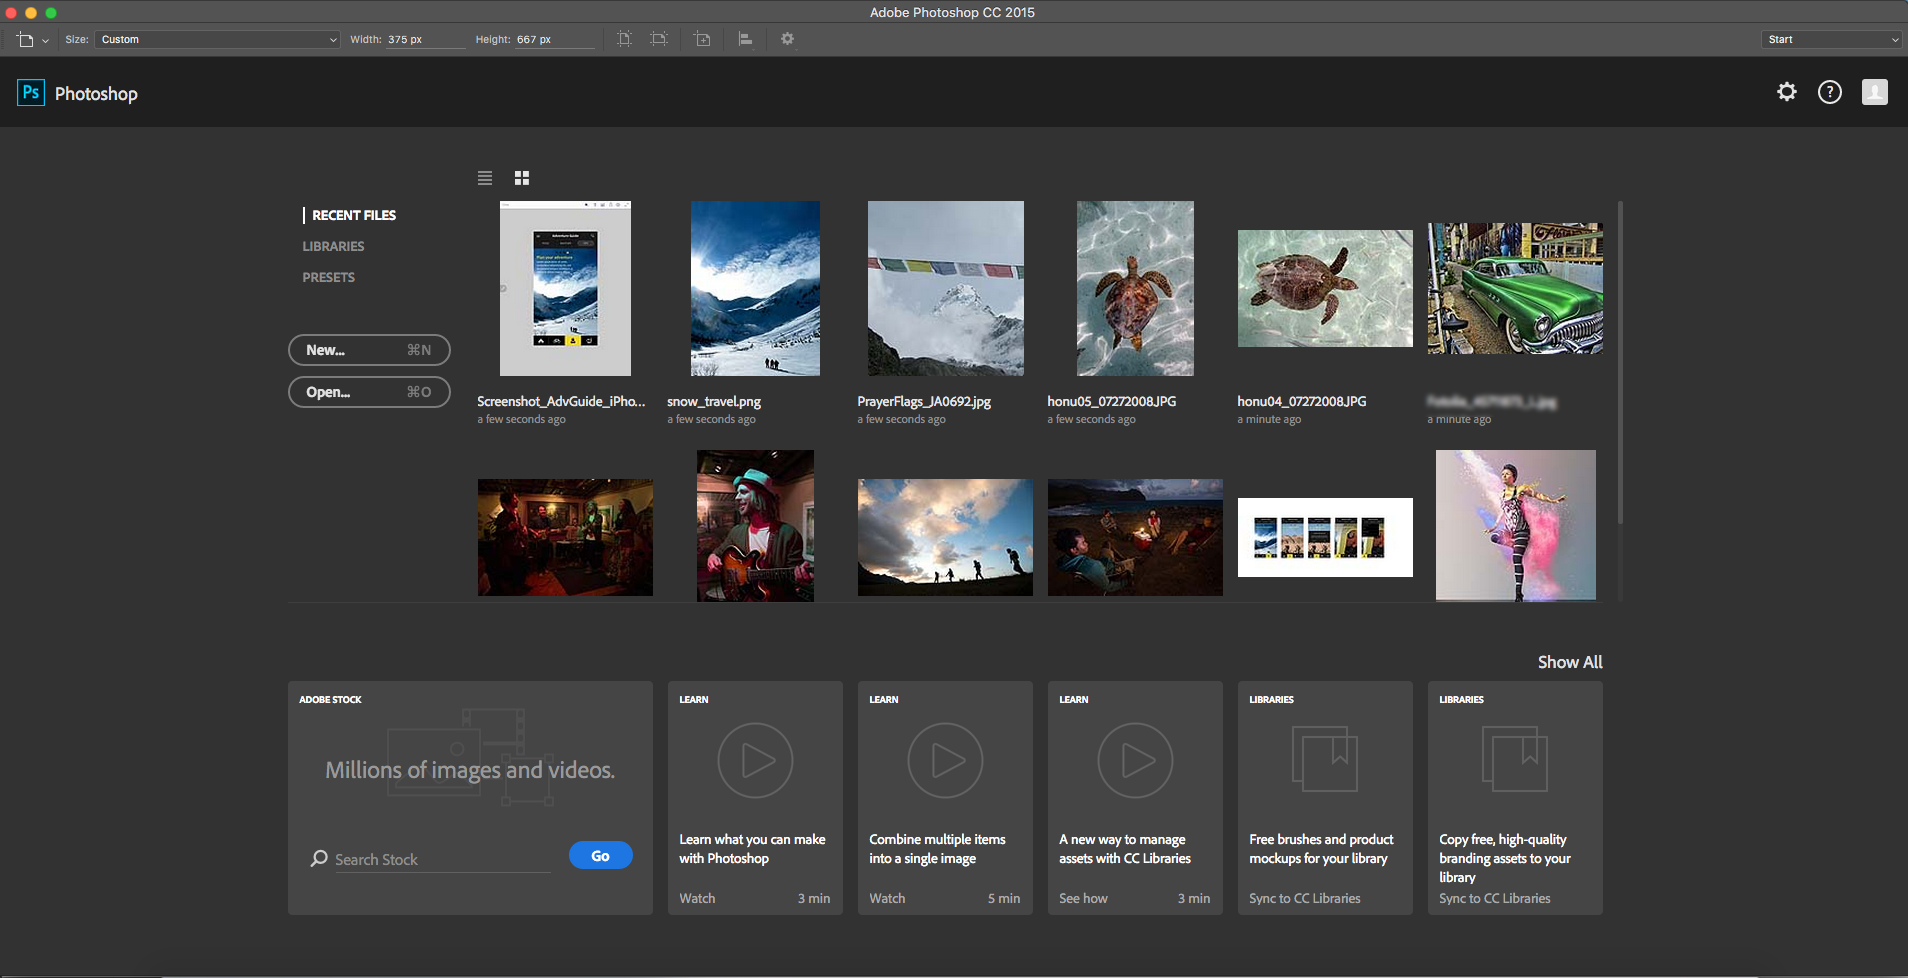 Adobe Photoshop Cs5 free. download full Version With Crack Cnet